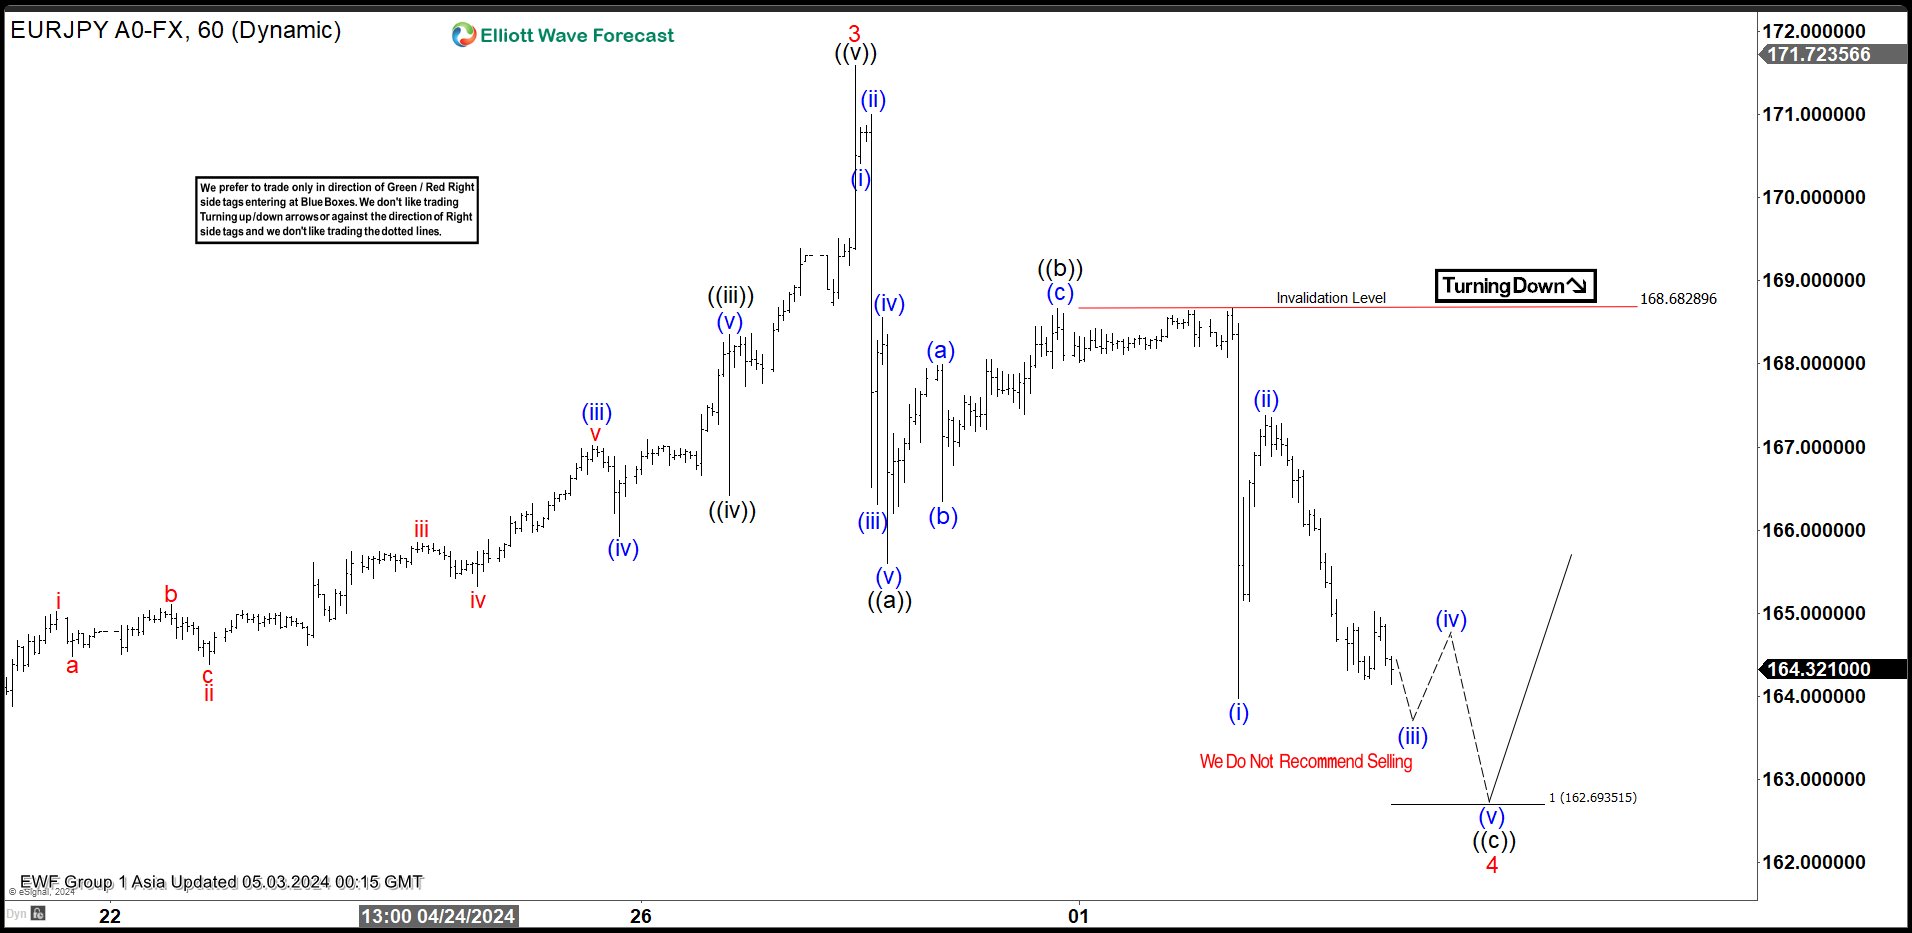 Elliott Wave Analysis on EURJPY Expects Support Soon